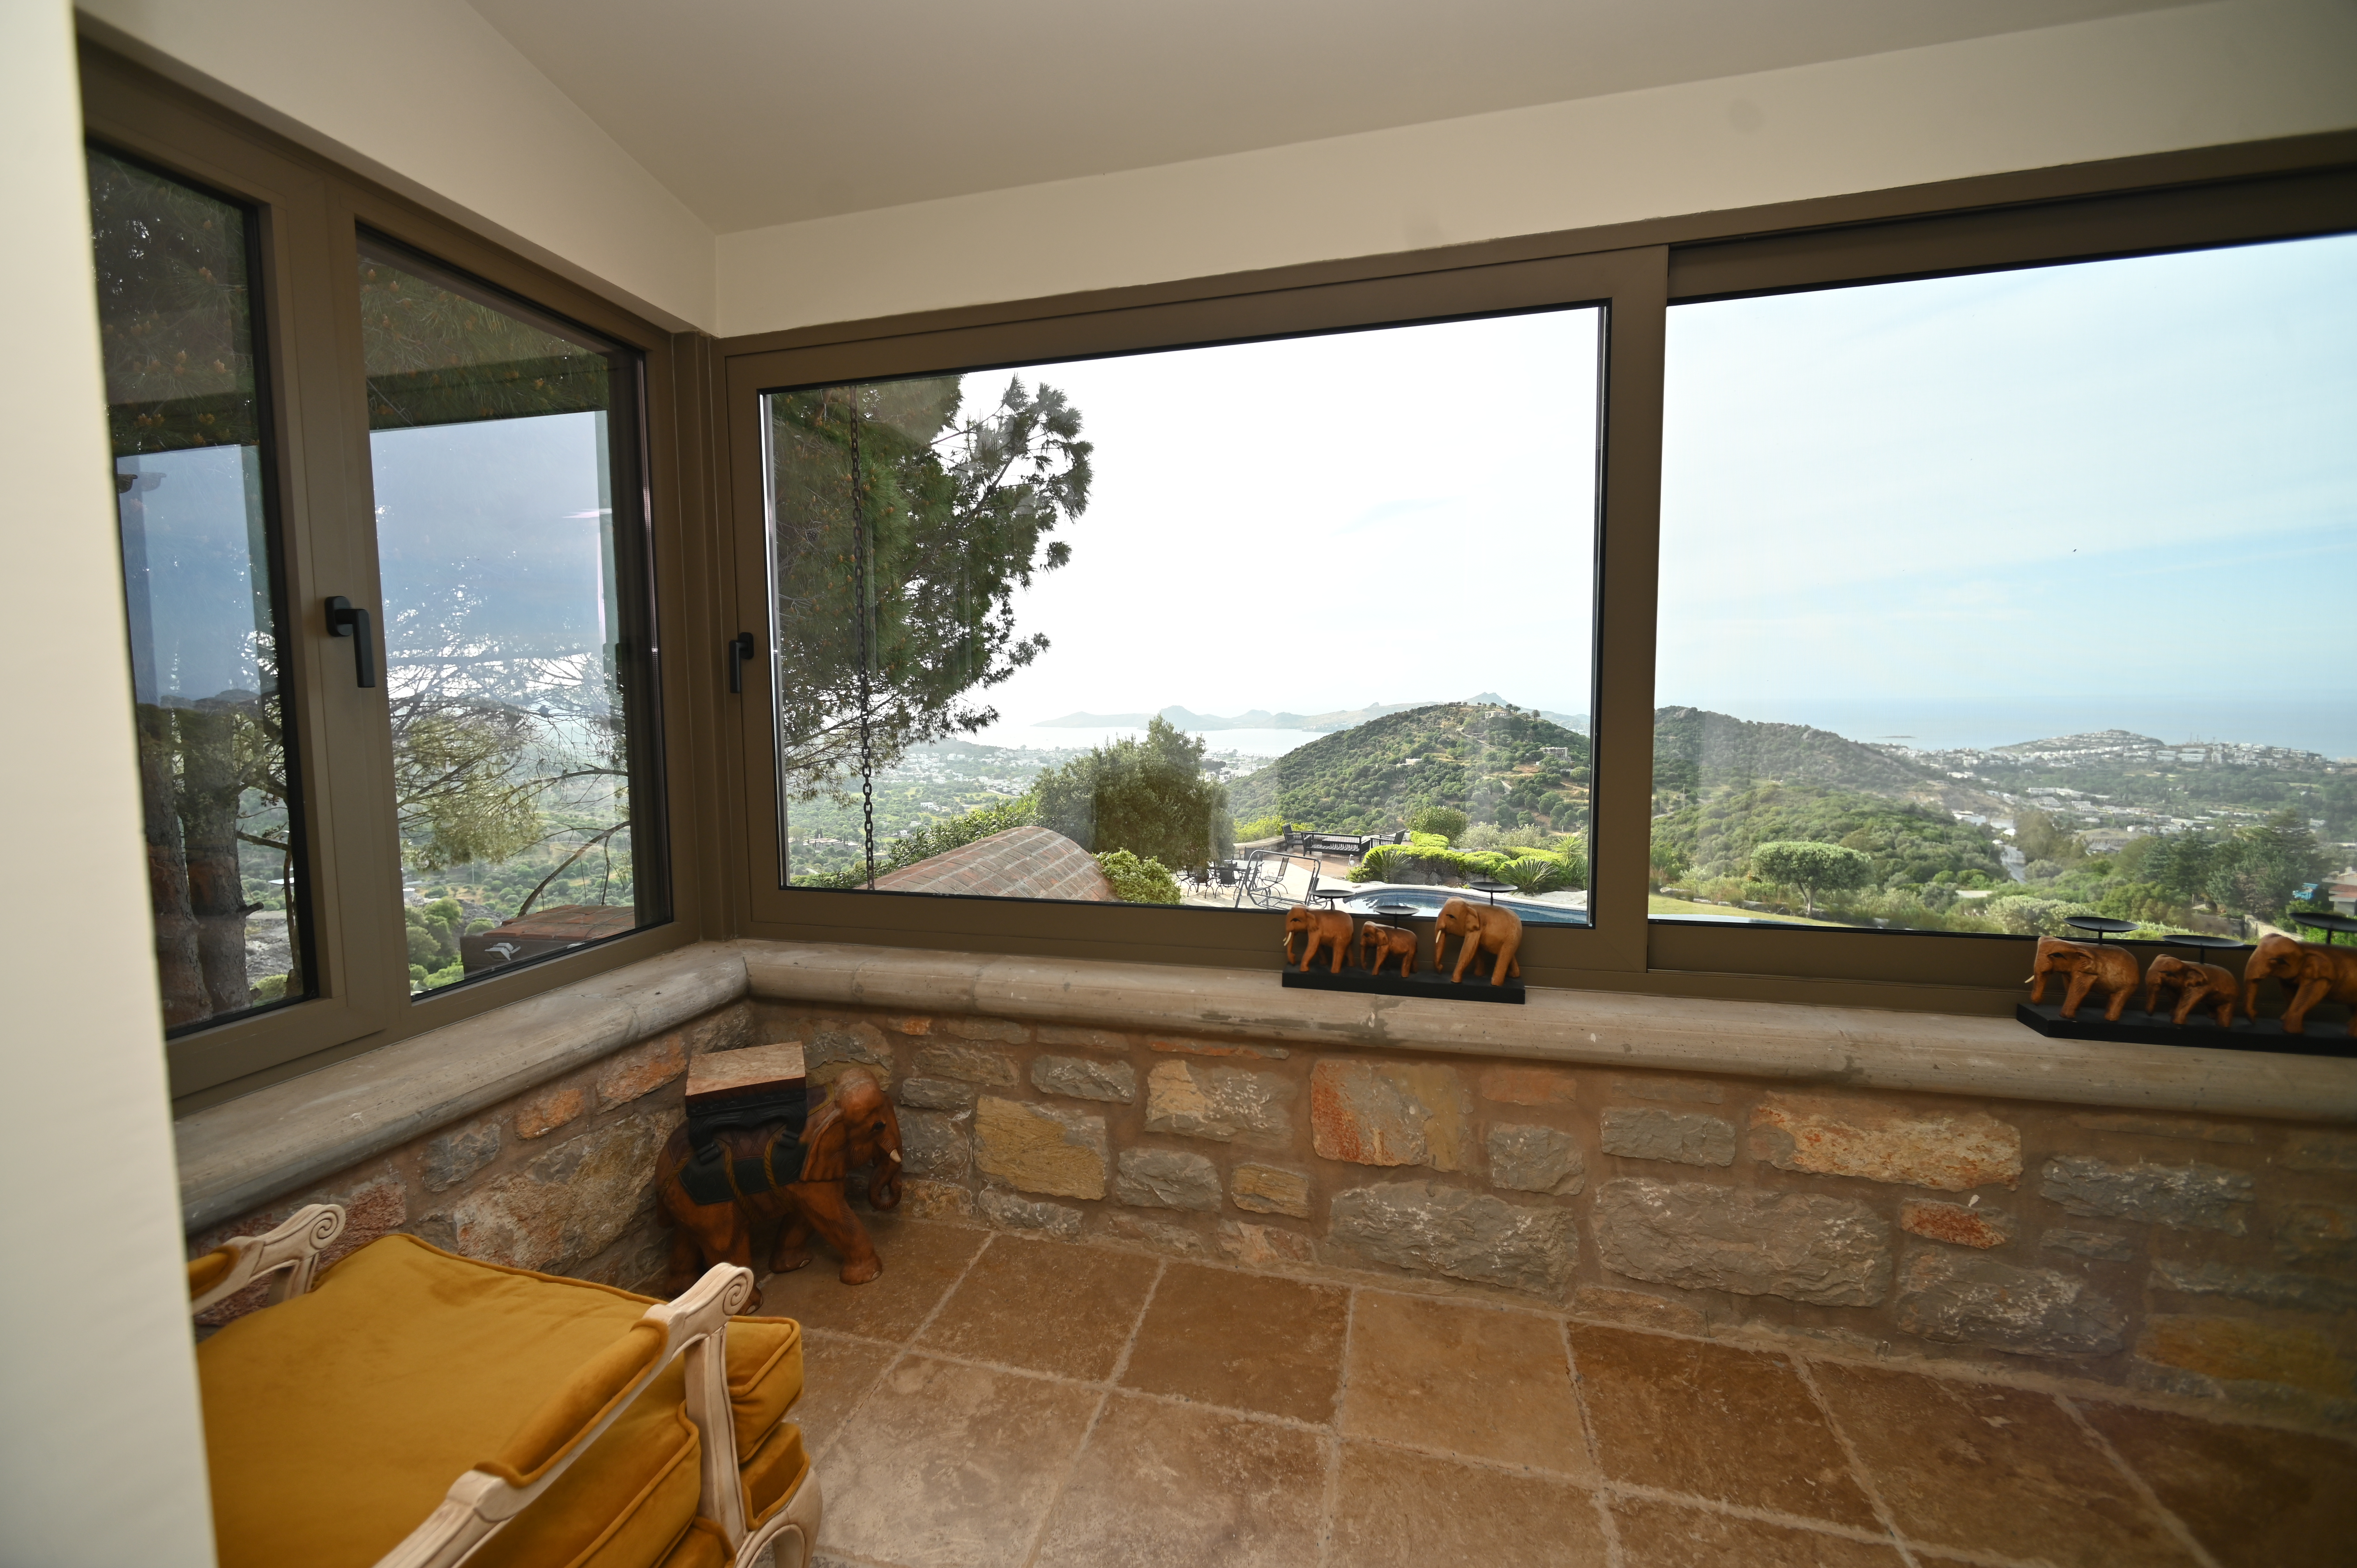 Luxurious Sea View Villa with Pool, Sauna, and Massage Room in Bodrum